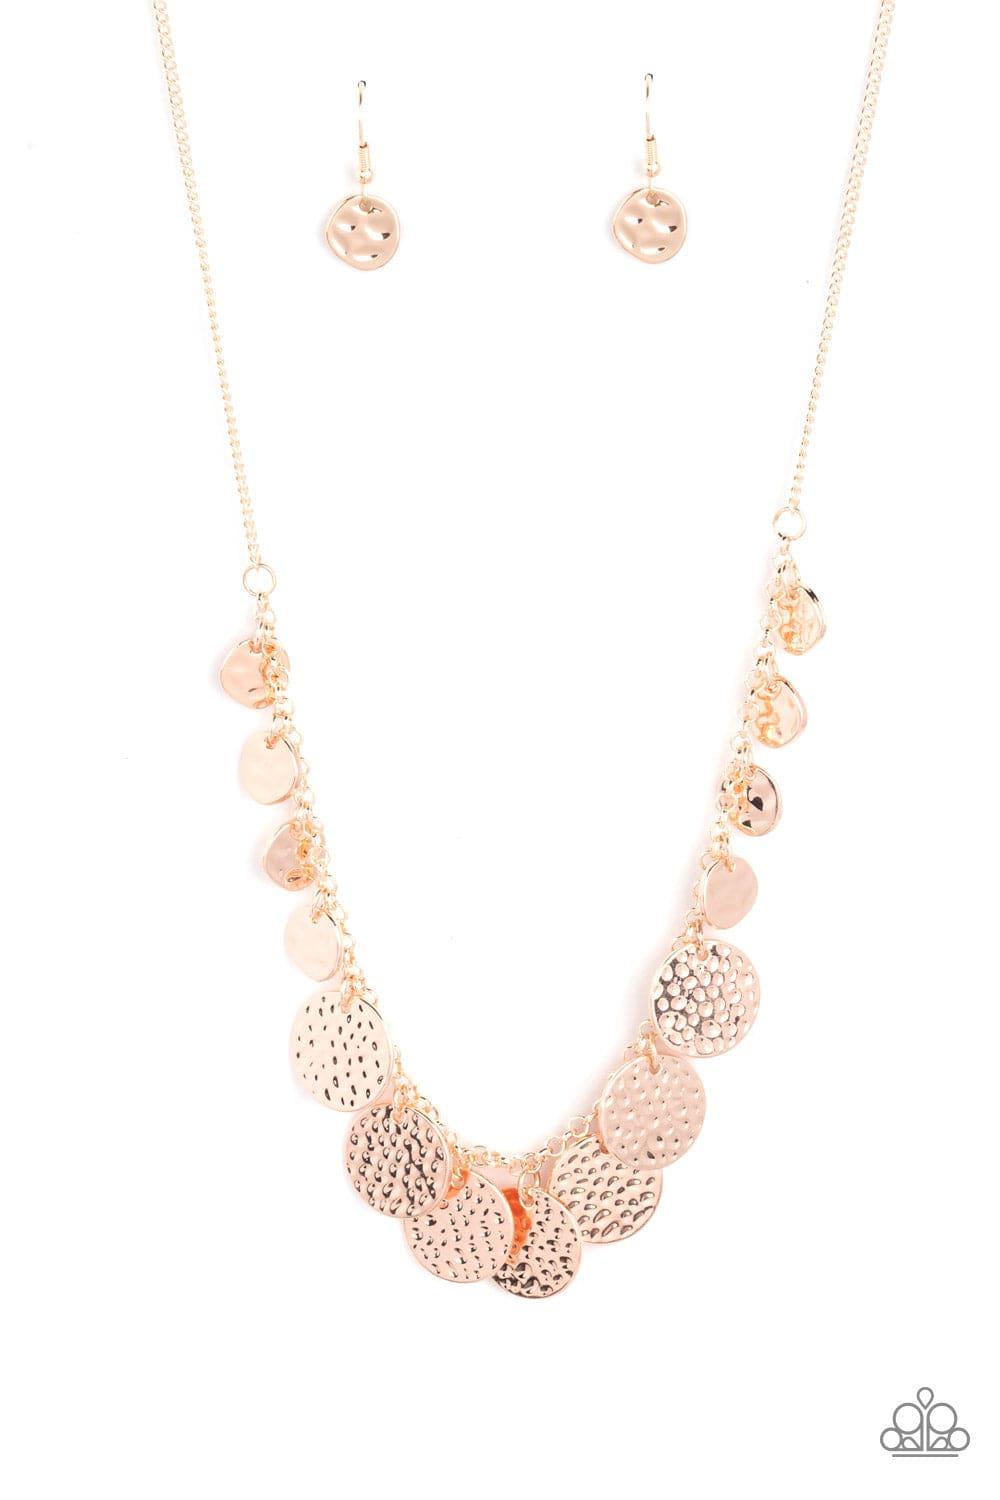 Paparazzi Accessories - Chime Warp - Rose Gold Necklace - Bling by JessieK